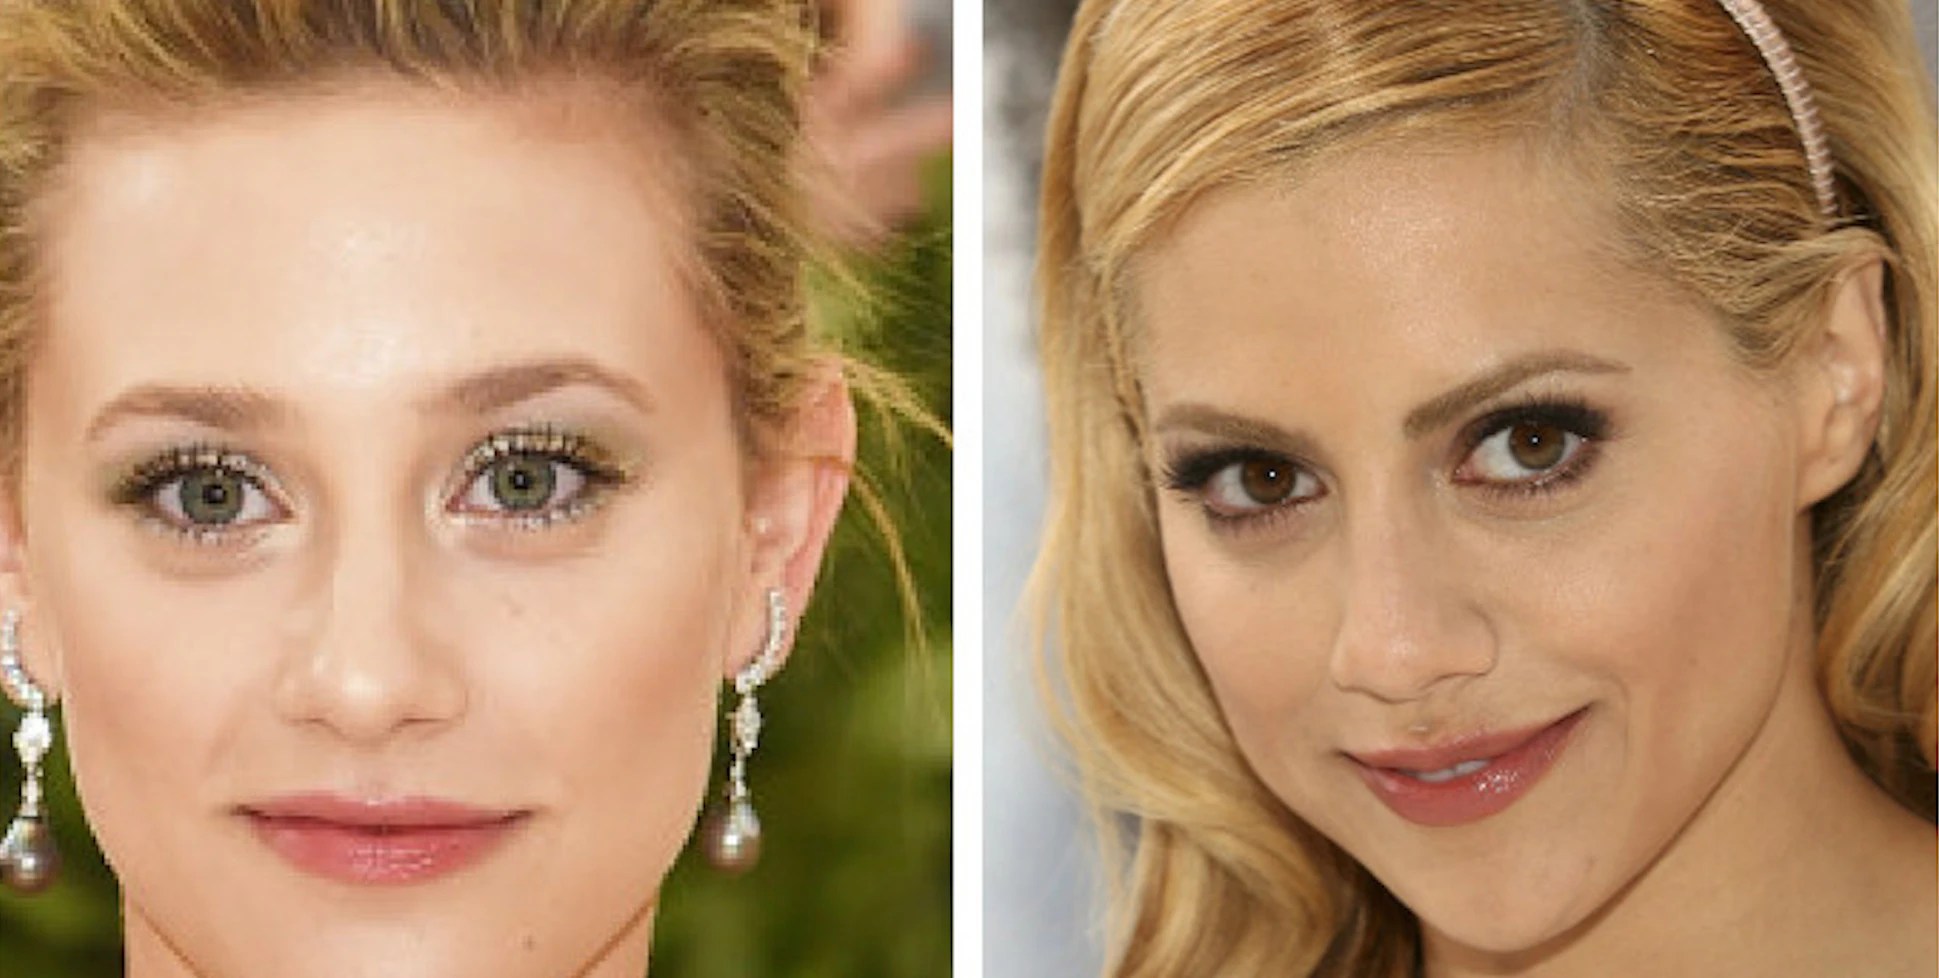 The Thinks Lili Reinhart And Brittany Murphy Are Doppelgängers